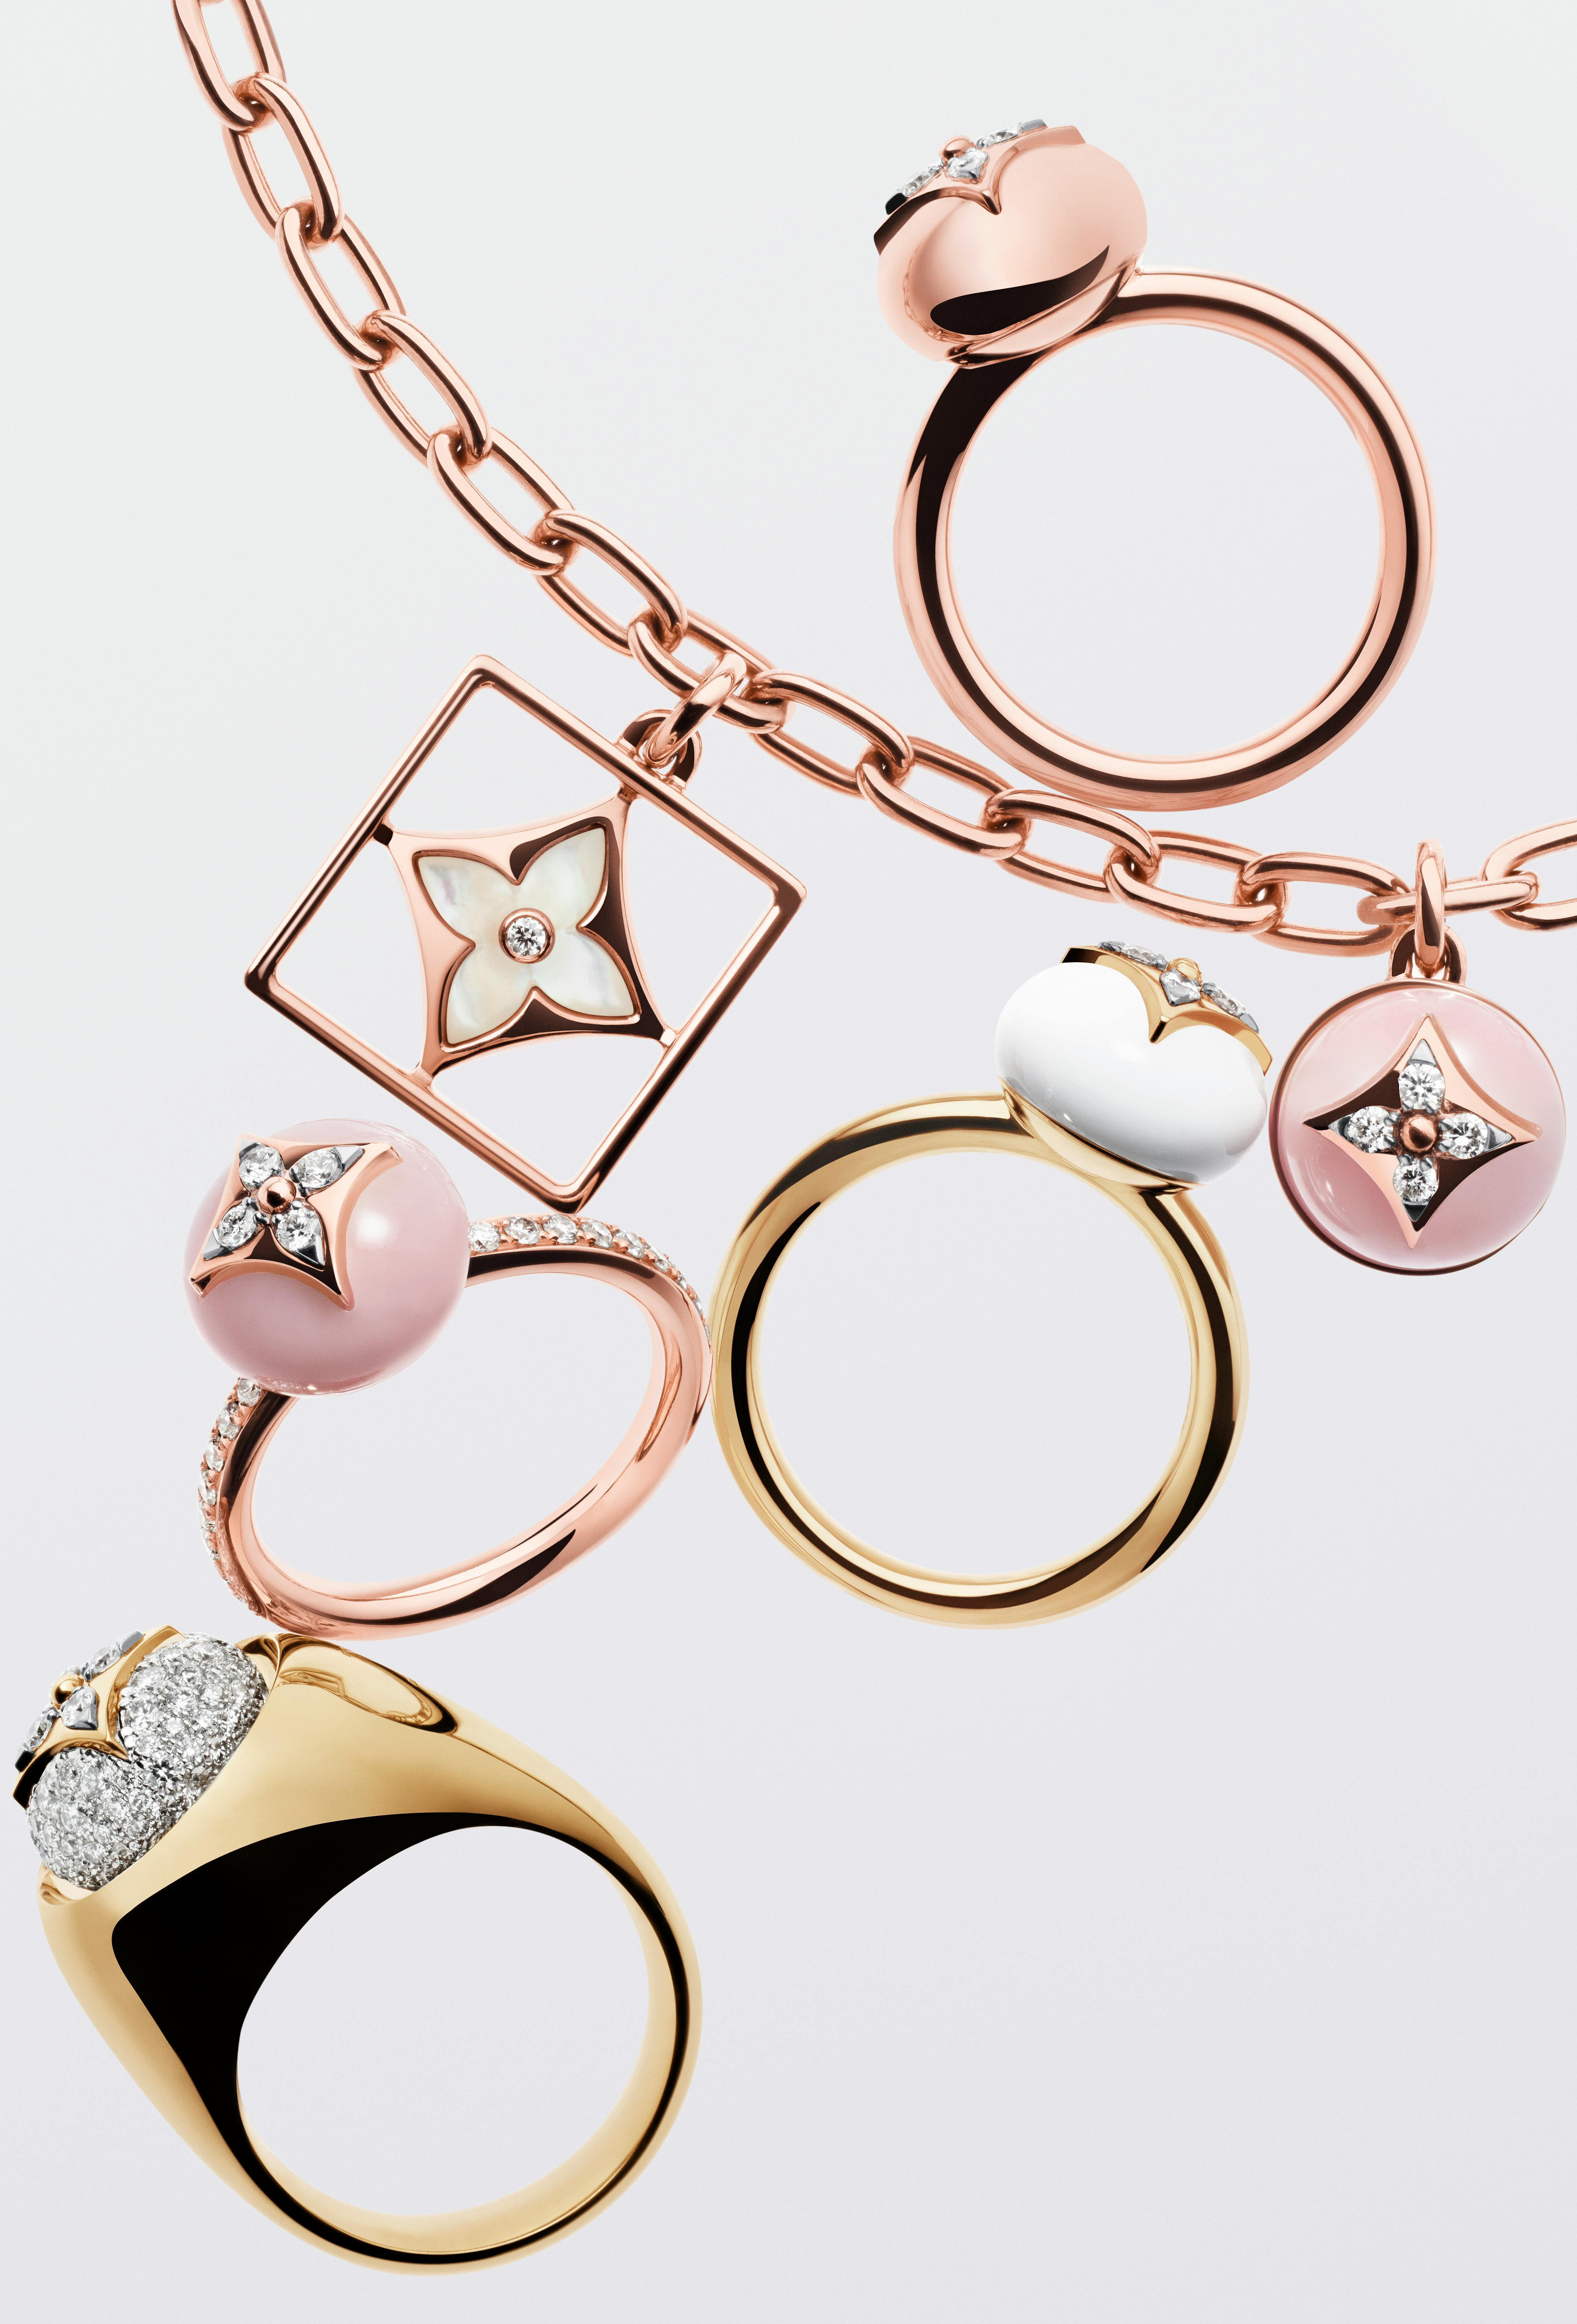 Louis Vuitton® B Blossom Pendant, Pink Gold, White Gold, Pink Opal